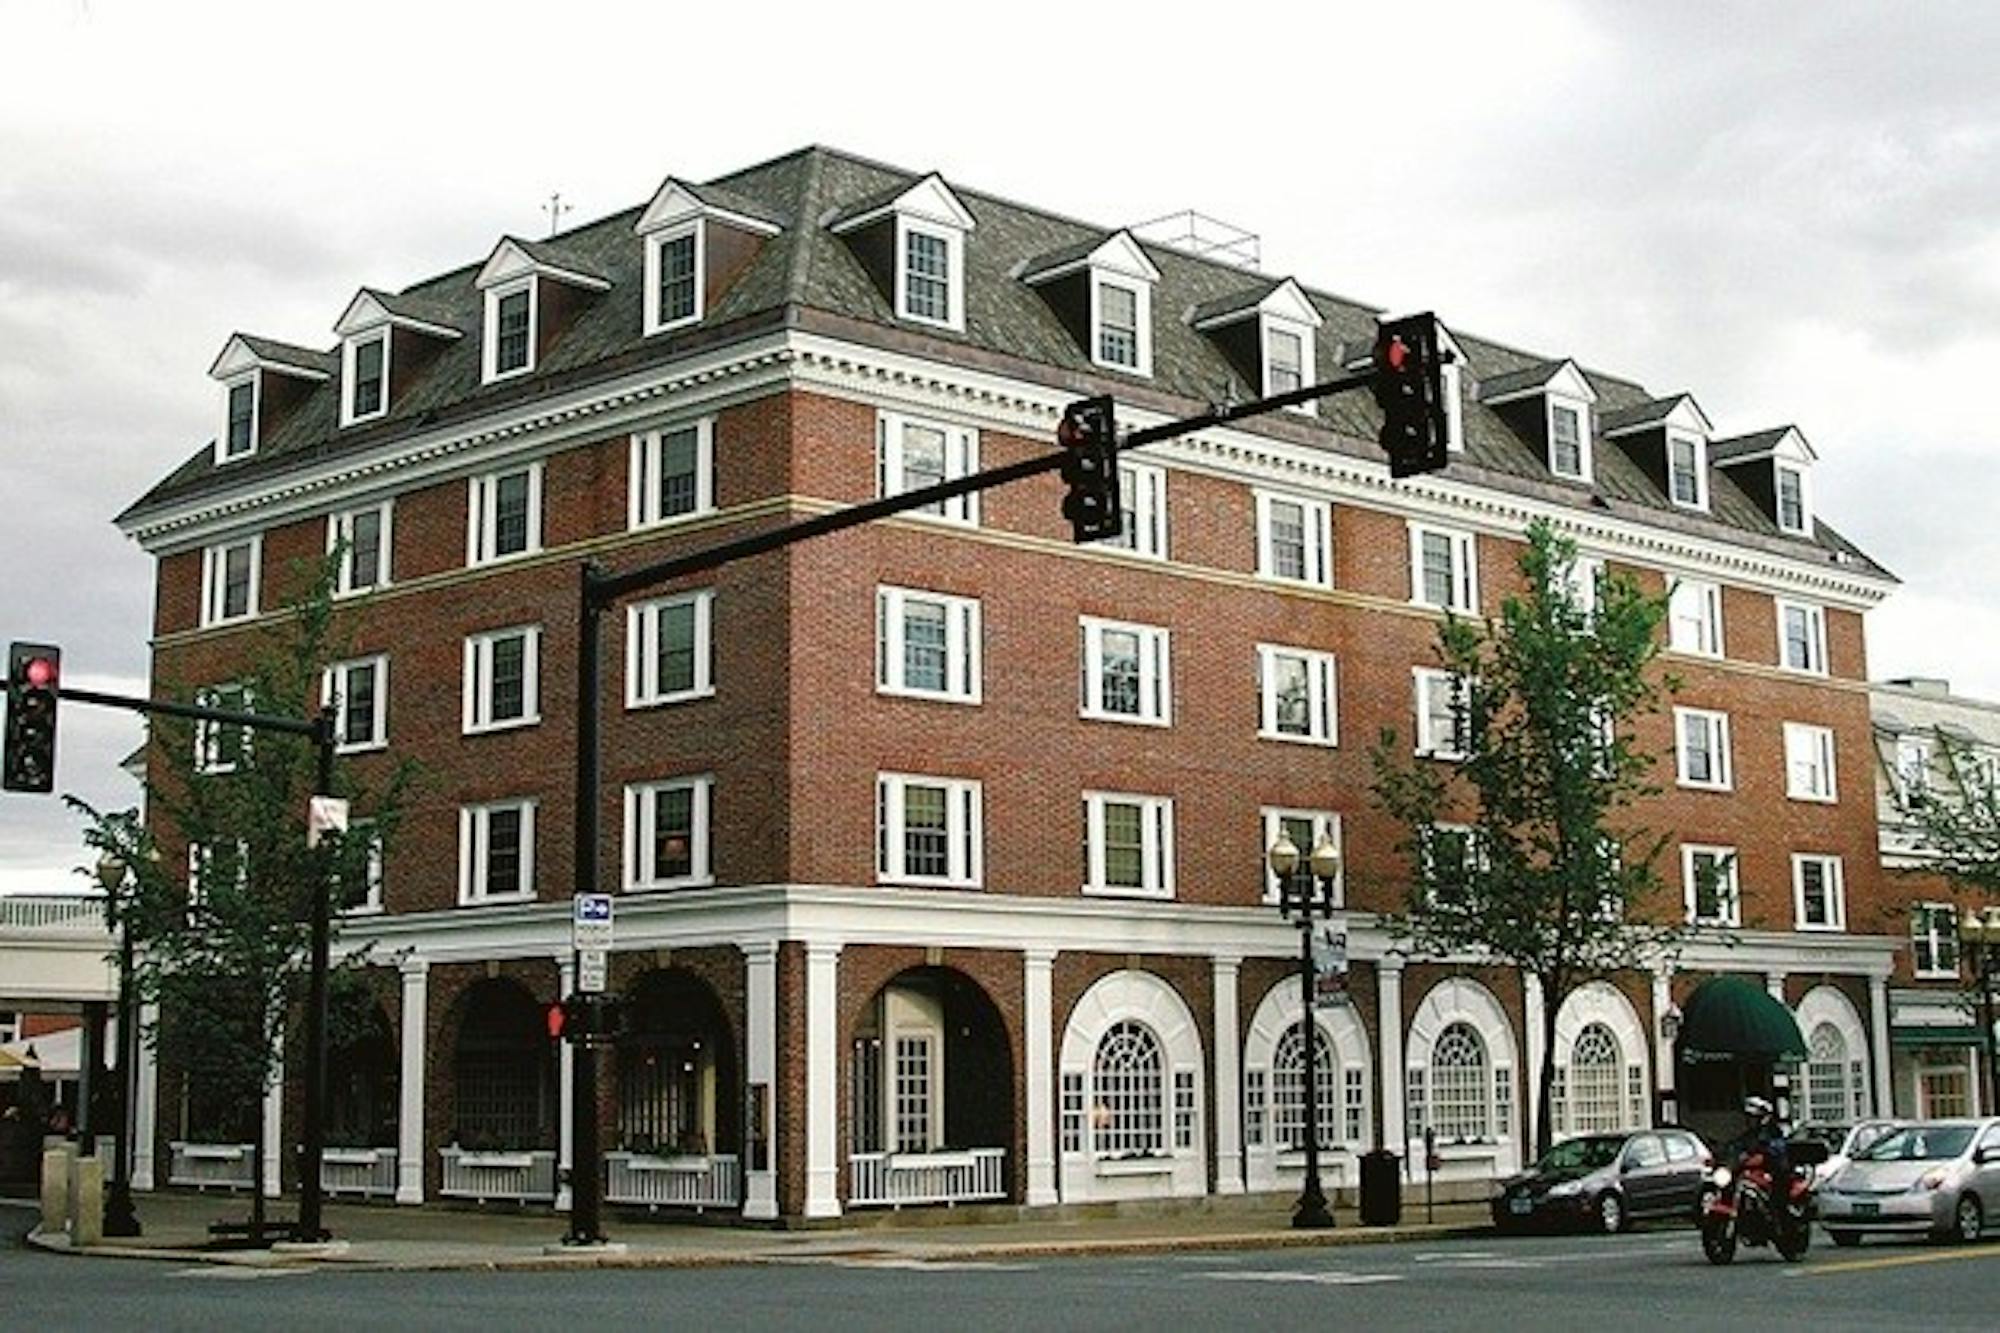 The Pyramid Hotel Group will begin running the daily operations of the Hanover Inn on August 1.